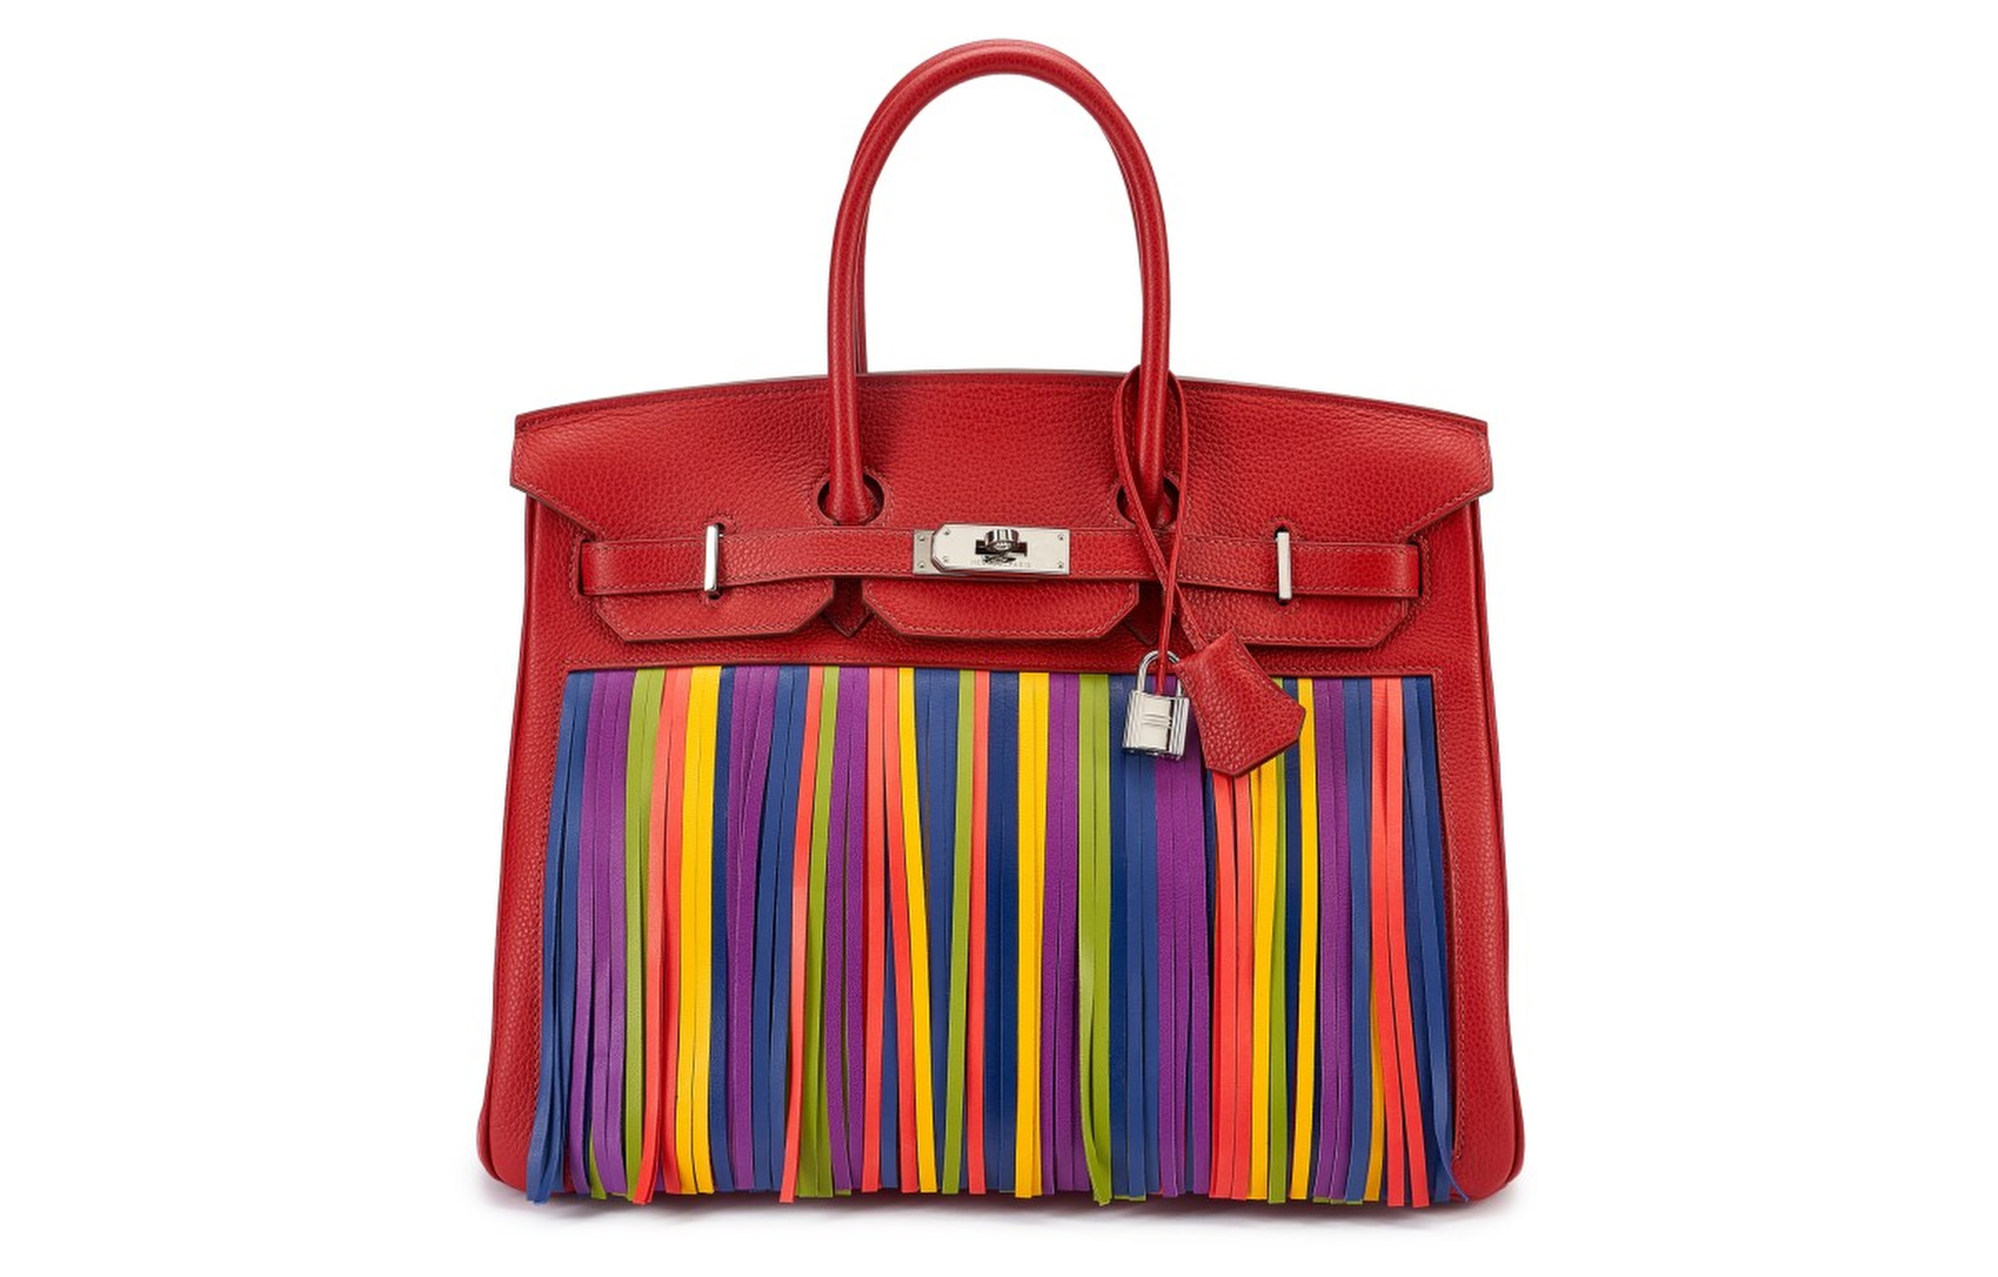 Hermes Kelly Archives - Auction Central News